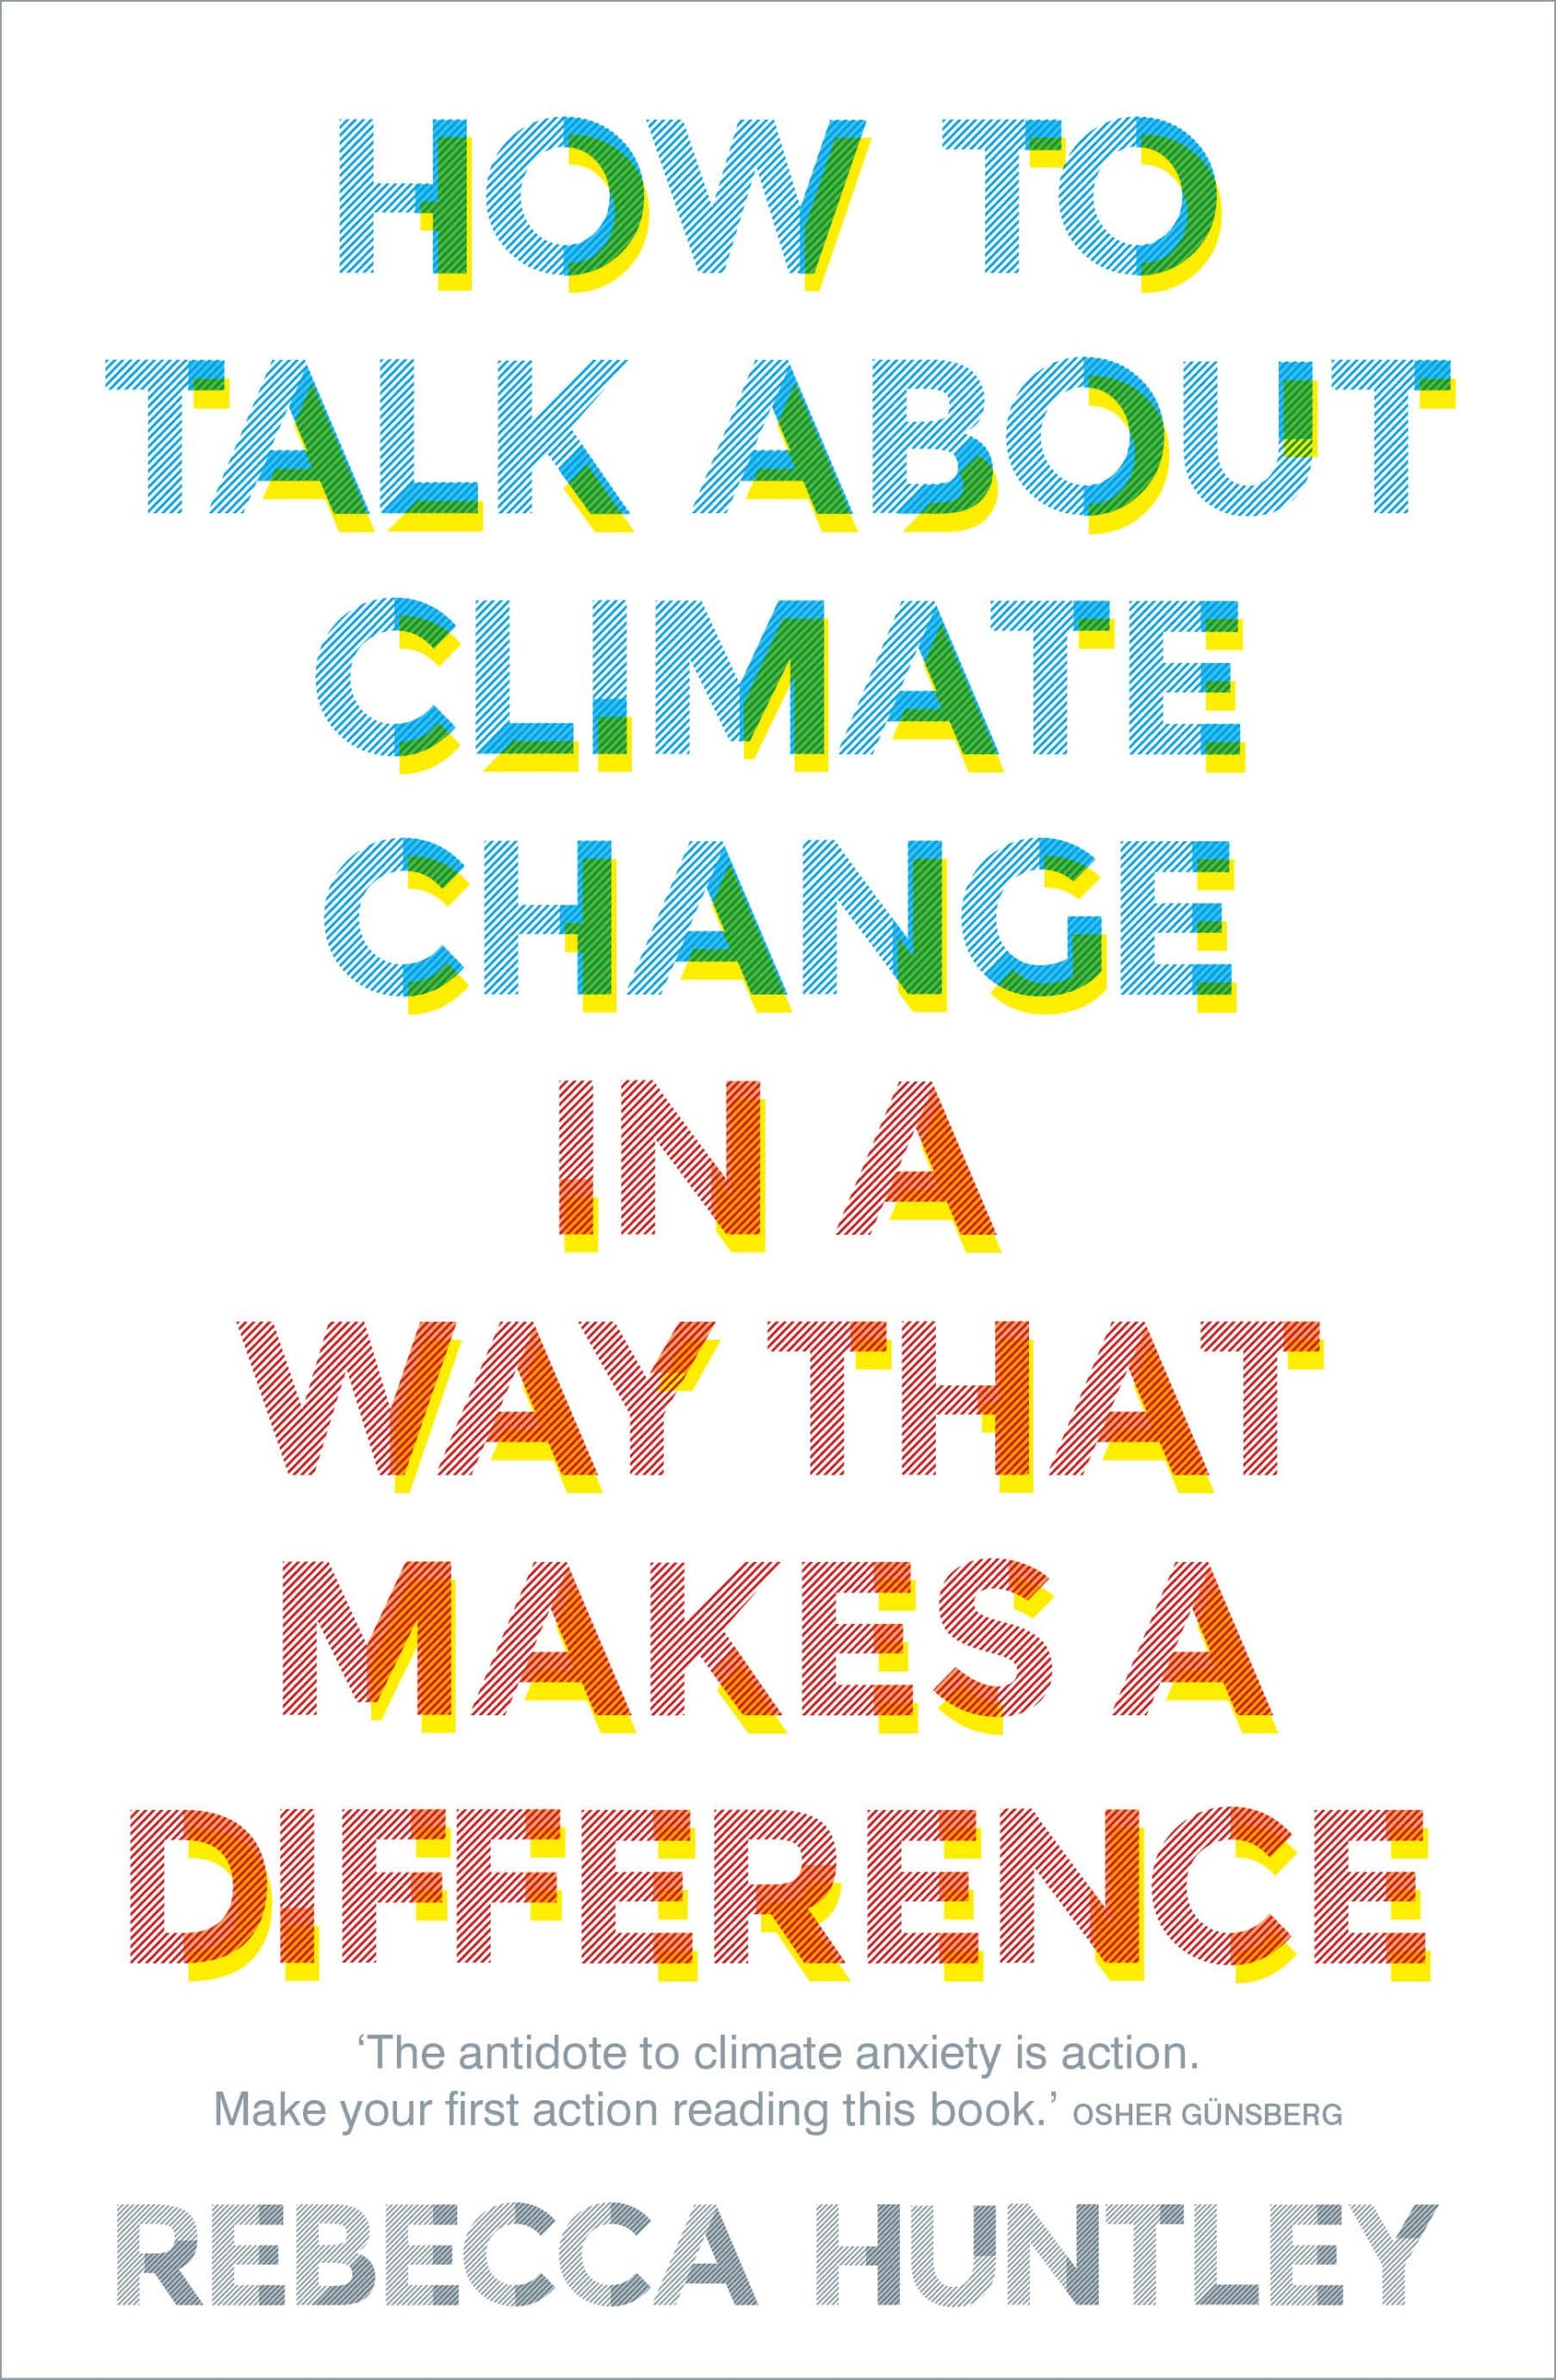 An image of the cover of Rebecca Huntley's new book, How to talk about climate change in a way that makes a difference. 